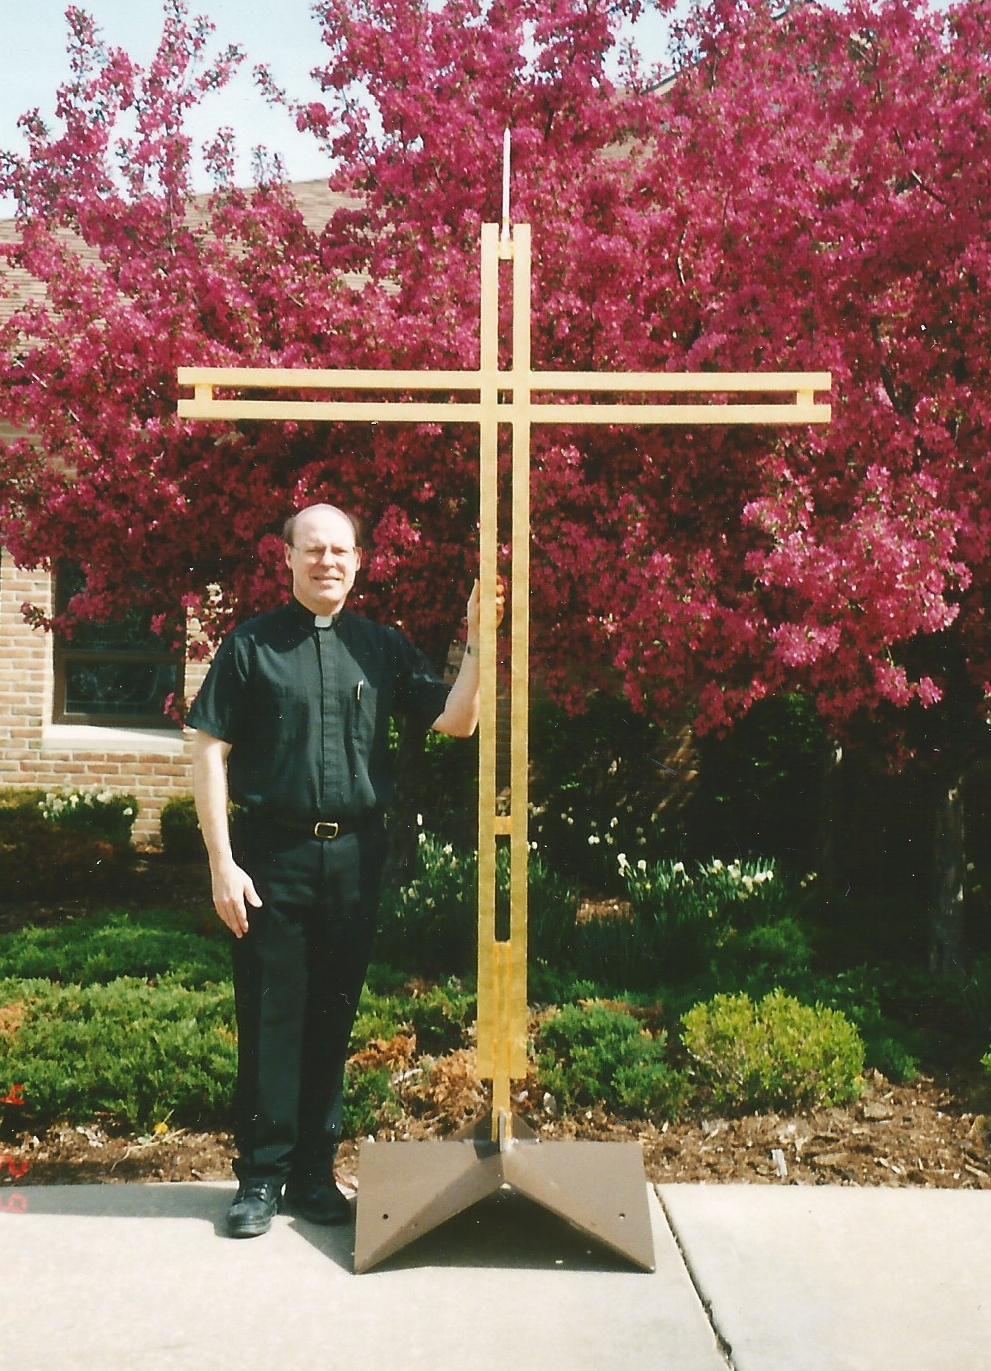 Father James Dvorscak A lasting legacy at St Mary Father Memenas Father Koop Deacon Grotovsky Father Jim s first priority as Pastor The Cross on top of the Church Bishop Imesch Father Burnett Father